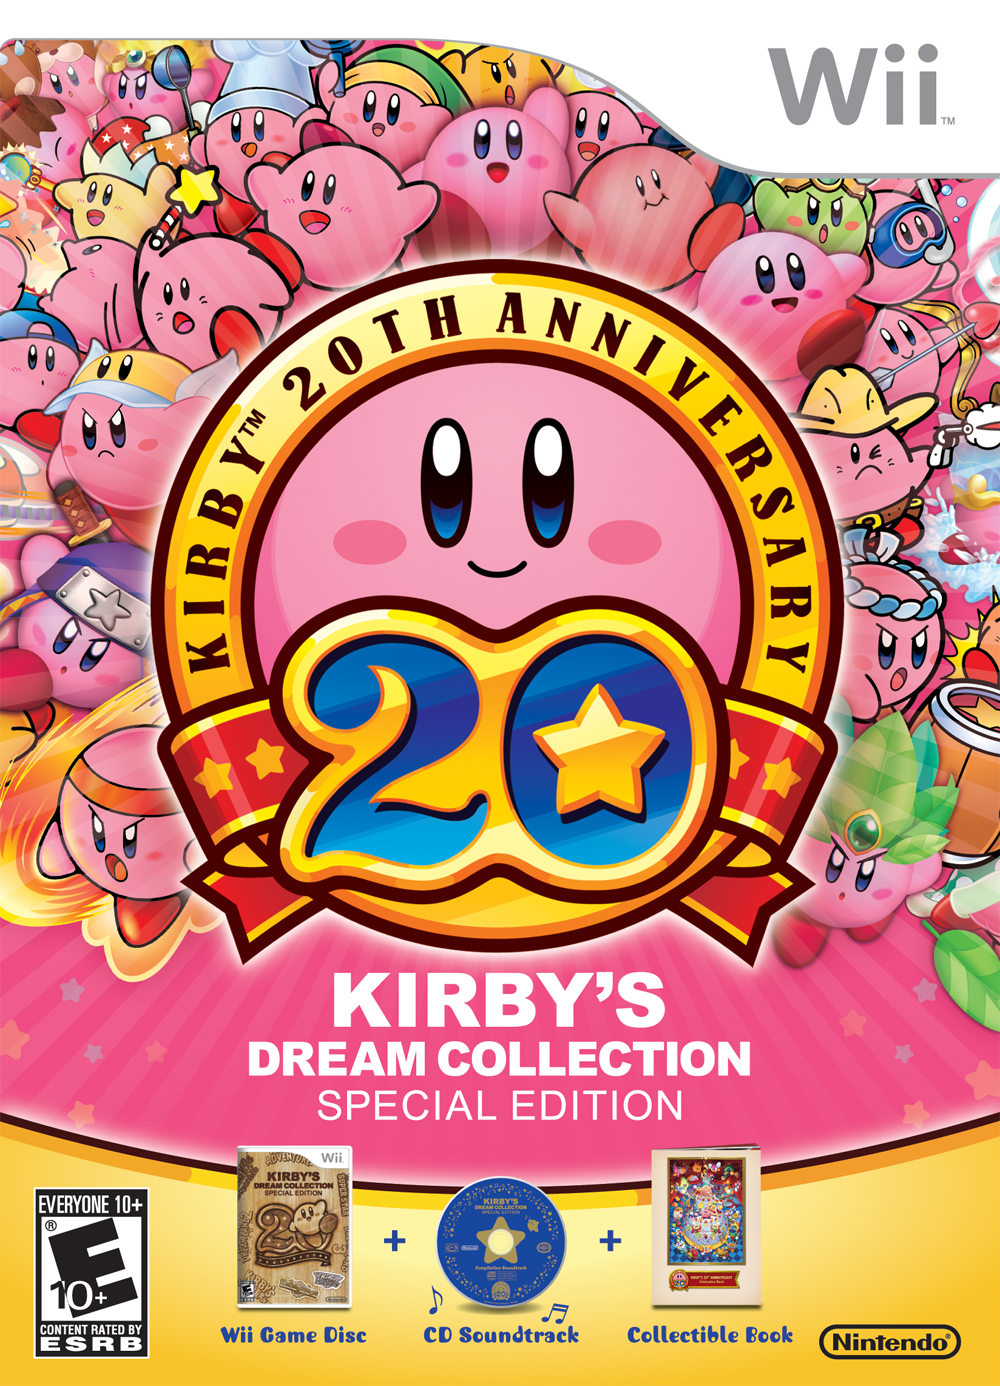 Kirby's Dream Collector's Special Edition - Nintendo Wii